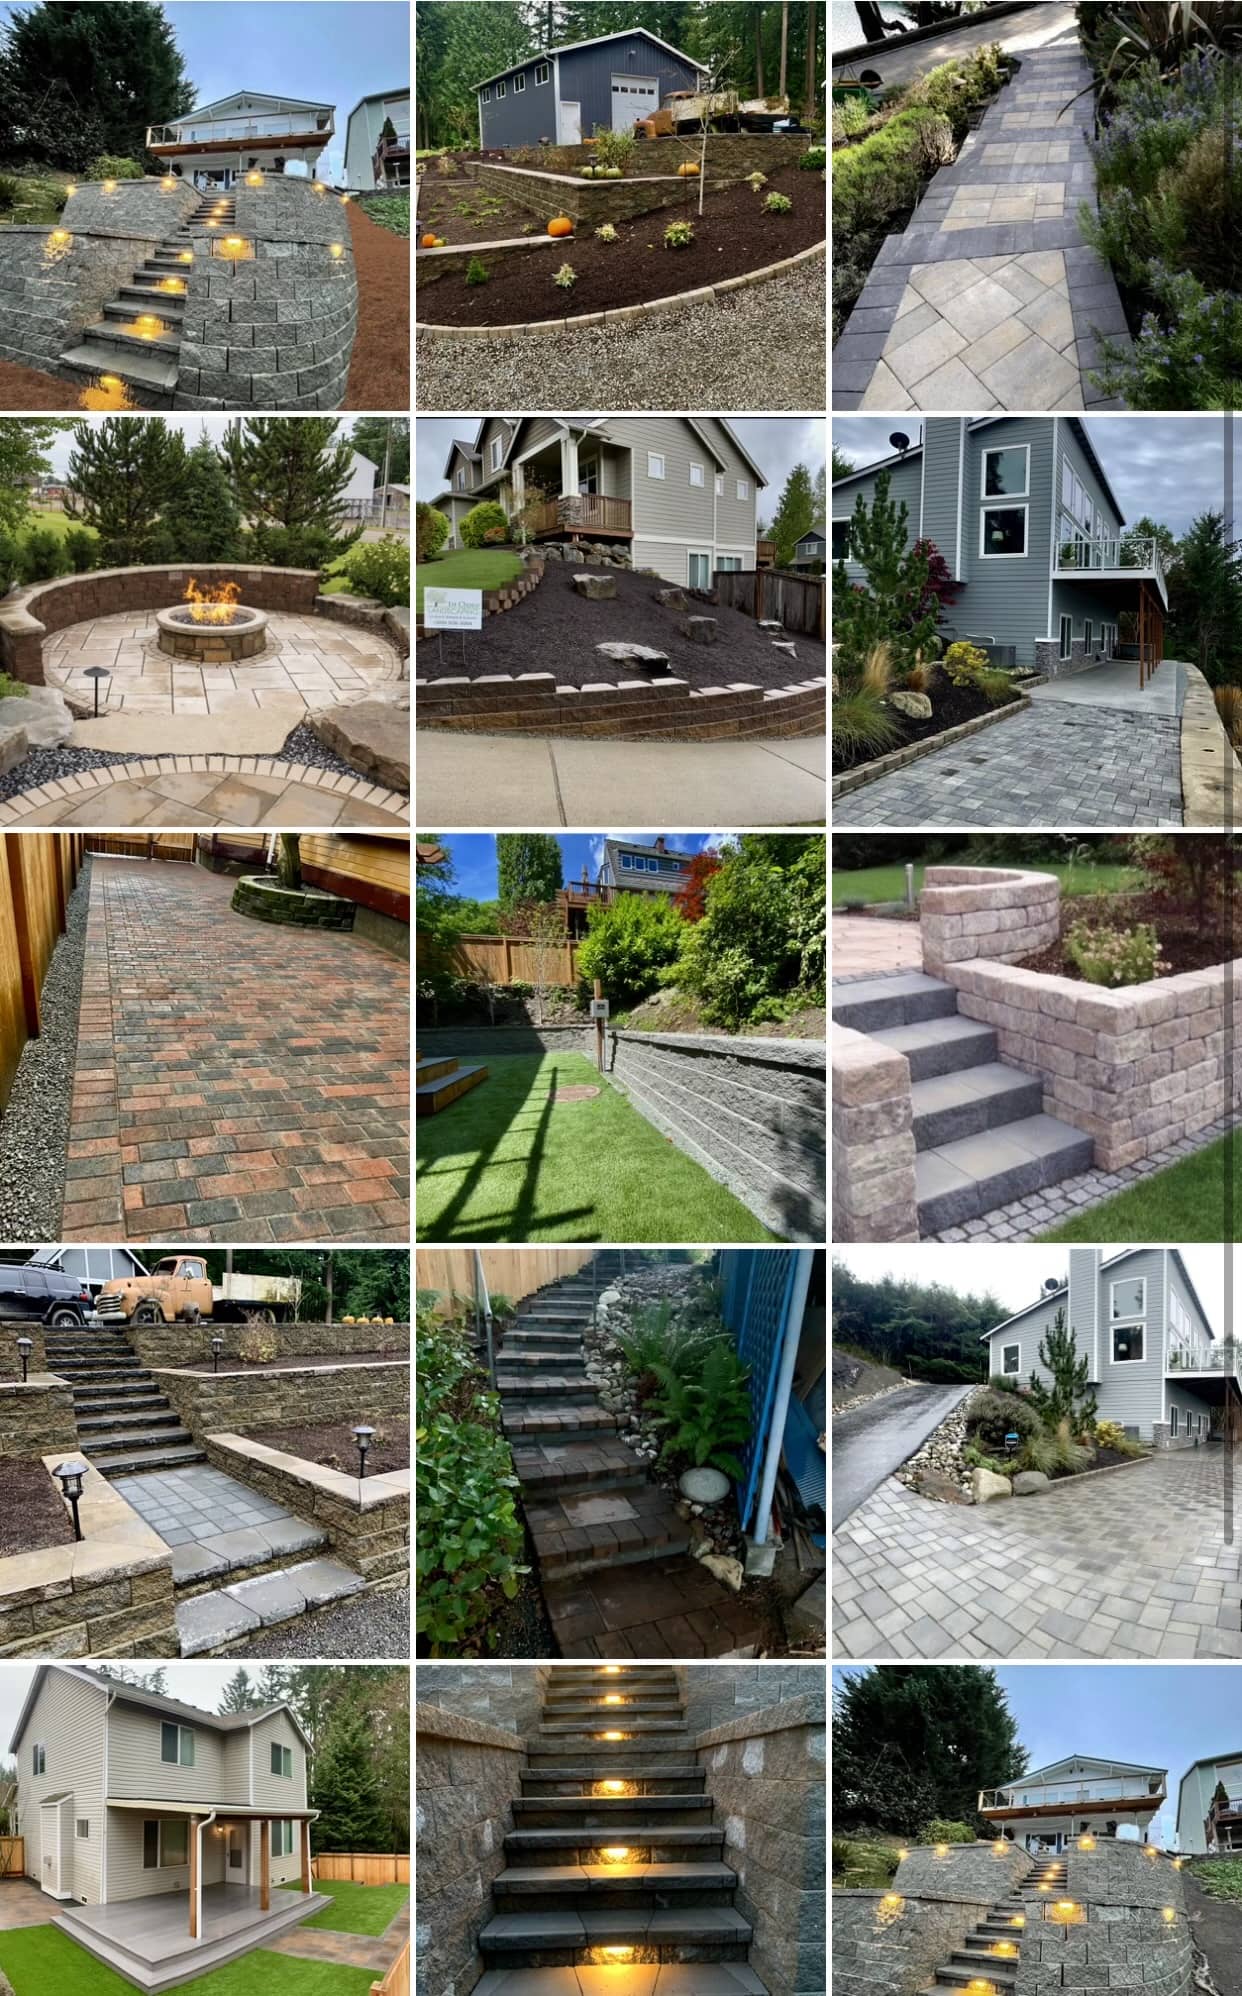 Landscaping Company, Retaining Wall Construction and Paver Installation